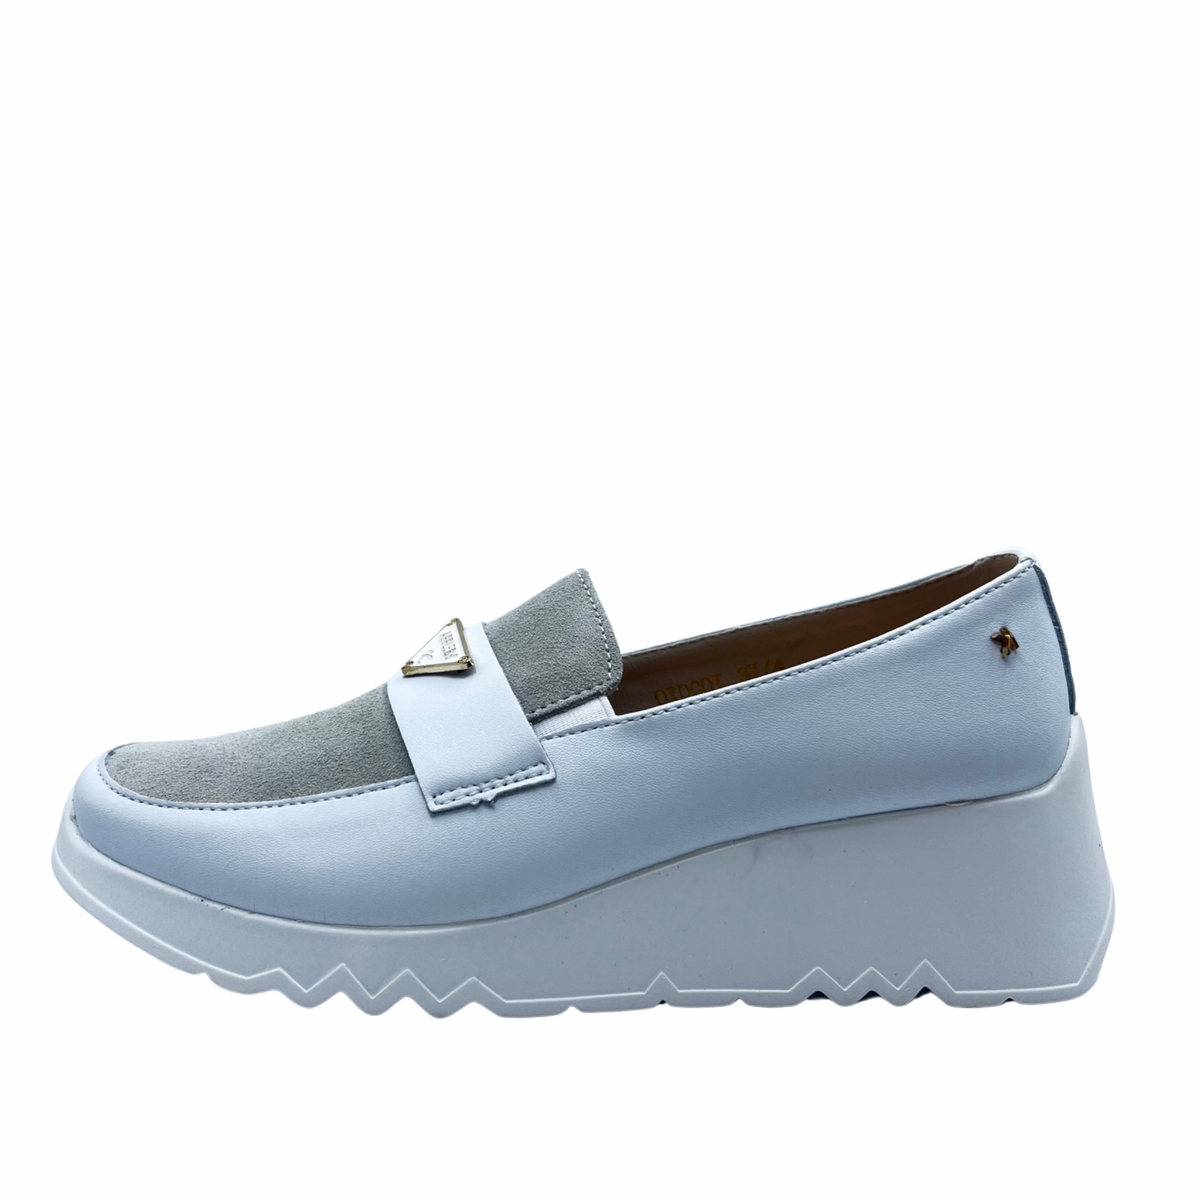 Kate Appleby White and Grey Wedge Loafer